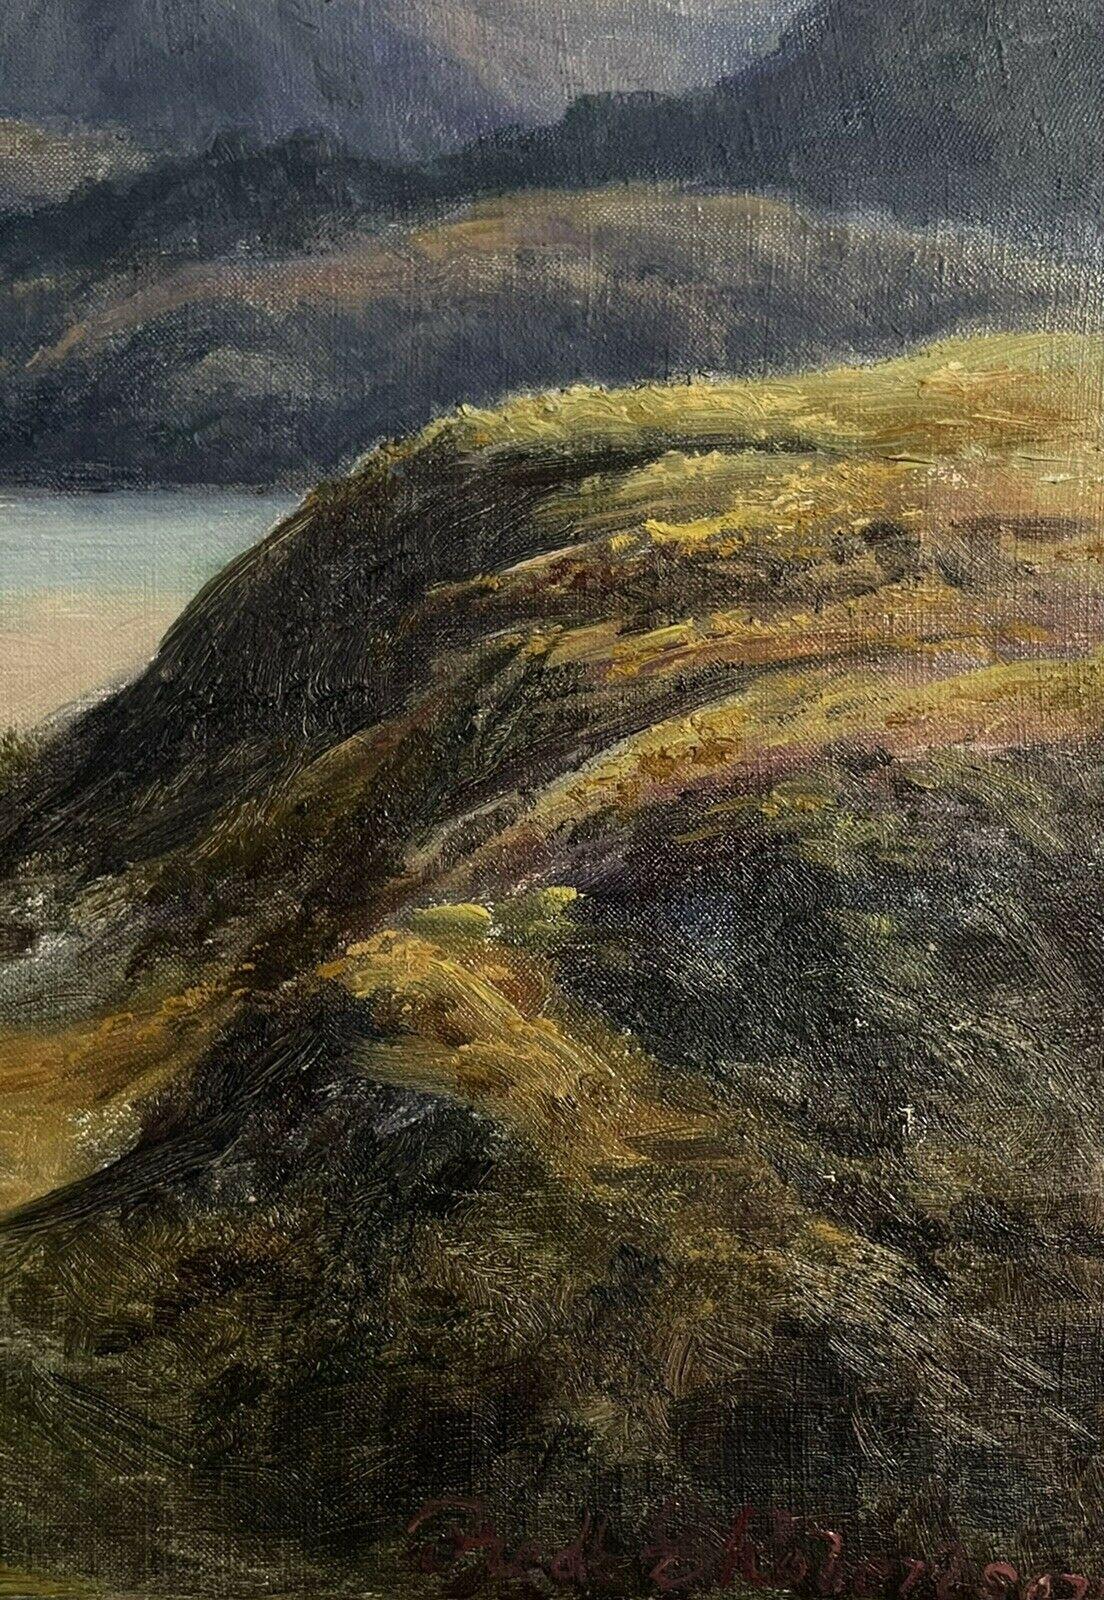 Artist/ School: Irish School, early 20th century, indistinctly signed lower corner

Title: Golden Sunlight over the soft mountains of Ireland. 

Medium:  signed oil painting on canvas, unframed.

canvas:   16  x  21 inches

Provenance: private